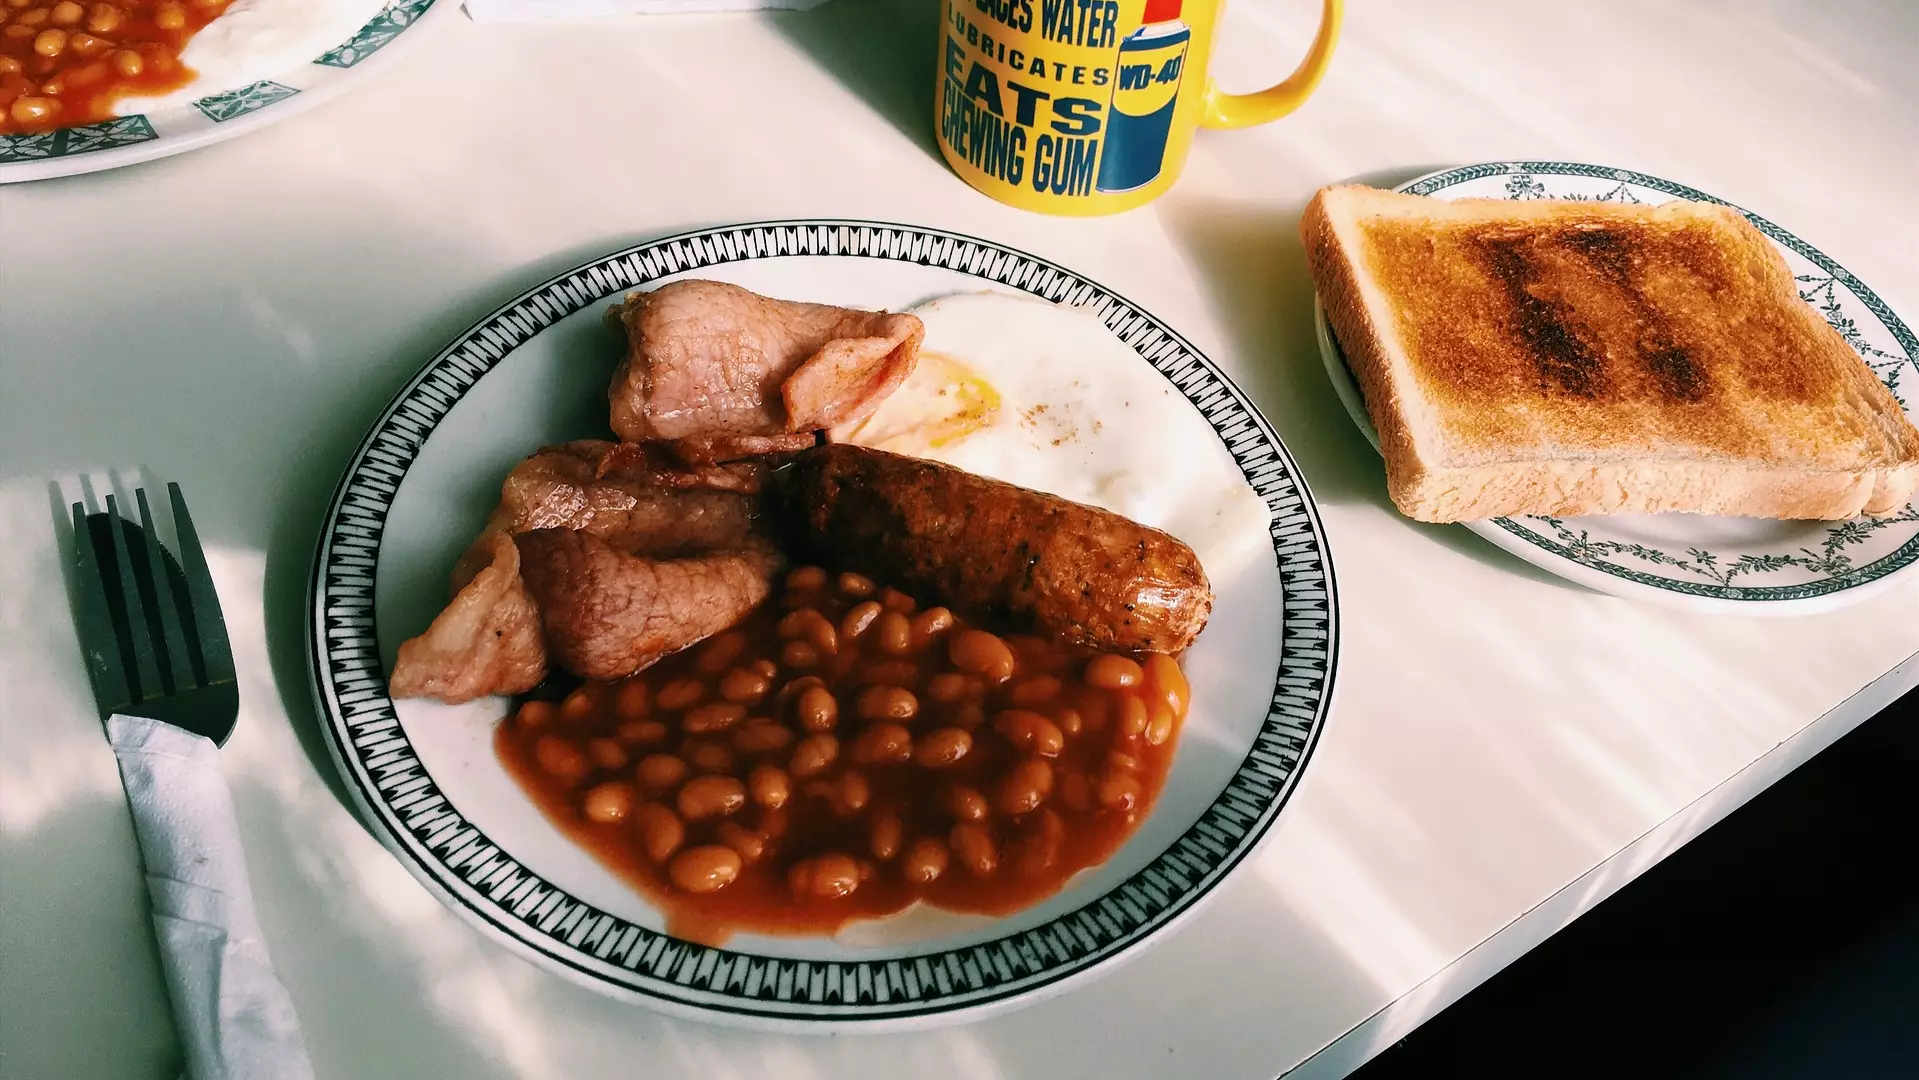 Cafe Offers £1 Fry-Ups To Help Struggling Families